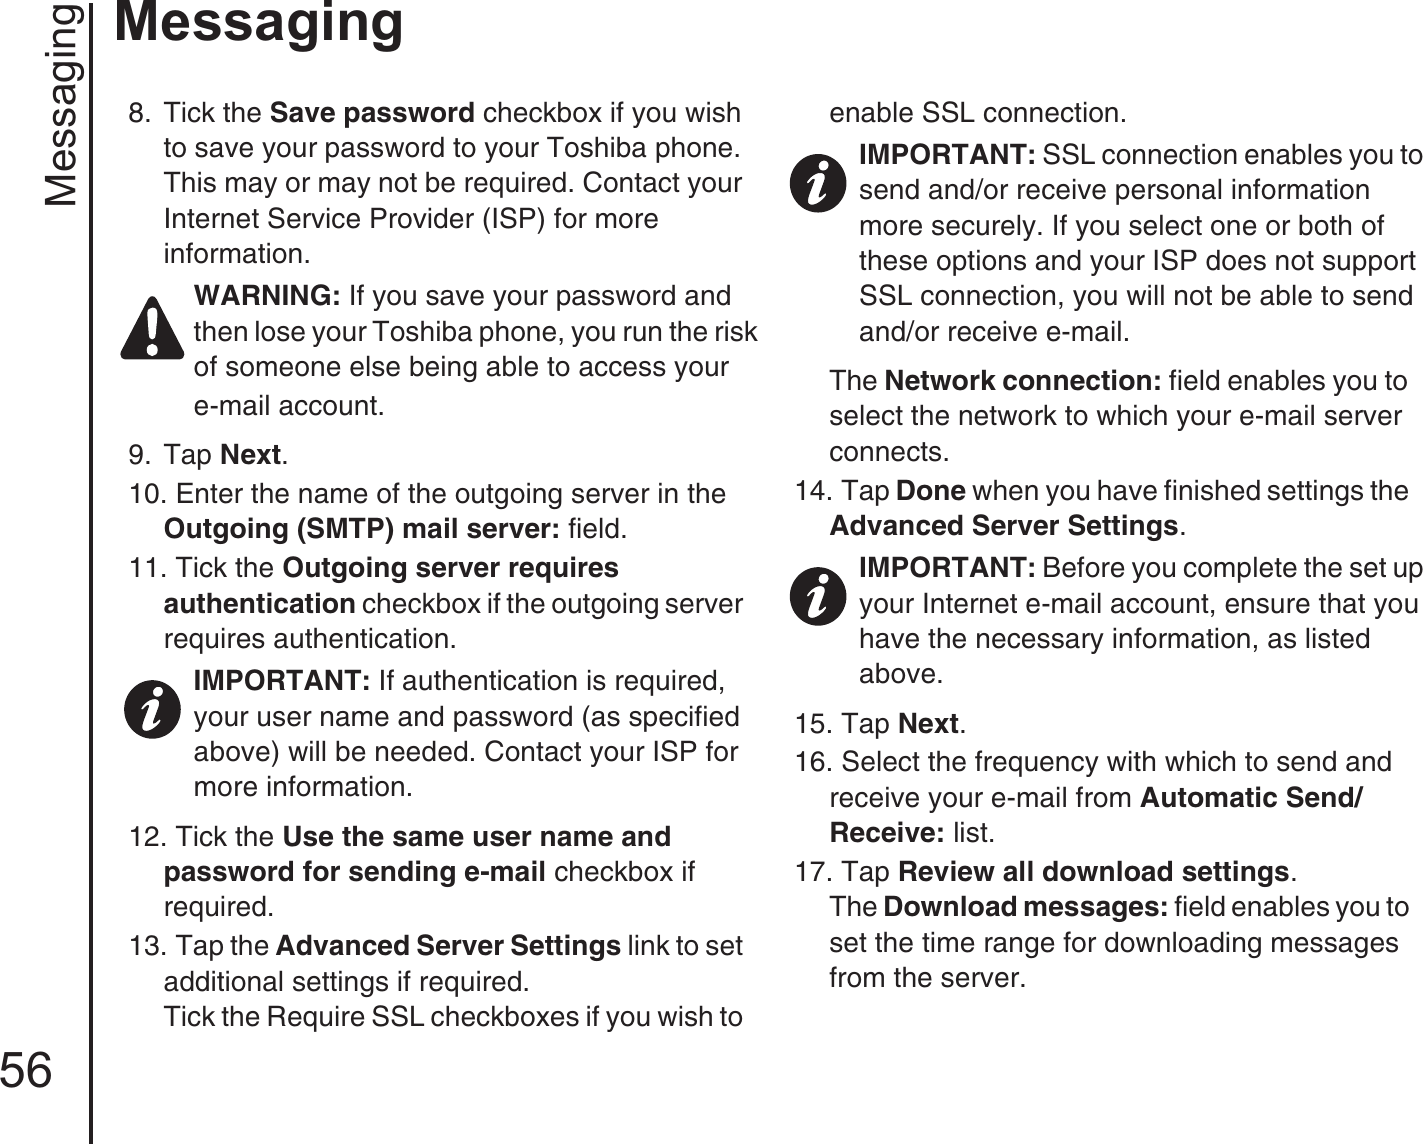 Messaging56Messaging8.  Tick the Save password checkbox if you wish to save your password to your Toshiba phone. This may or may not be required. Contact your Internet Service Provider (ISP) for more information.9.  Tap Next.10. Enter the name of the outgoing server in the Outgoing (SMTP) mail server: field.11. Tick the Outgoing server requires authentication checkbox if the outgoing server requires authentication.12. Tick the Use the same user name and password for sending e-mail checkbox if required.13. Tap the Advanced Server Settings link to set additional settings if required.Tick the Require SSL checkboxes if you wish to enable SSL connection.The Network connection: field enables you to select the network to which your e-mail server connects.14. Tap Done when you have finished settings the Advanced Server Settings.15. Tap Next.16. Select the frequency with which to send and receive your e-mail from Automatic Send/Receive: list.17. Tap Review all download settings.The Download messages: field enables you to set the time range for downloading messages from the server.WARNING: If you save your password and then lose your Toshiba phone, you run the risk of someone else being able to access youre-mail account.IMPORTANT: If authentication is required, your user name and password (as specified above) will be needed. Contact your ISP for more information.IMPORTANT: SSL connection enables you to send and/or receive personal information more securely. If you select one or both of these options and your ISP does not support SSL connection, you will not be able to send and/or receive e-mail.IMPORTANT: Before you complete the set up your Internet e-mail account, ensure that you have the necessary information, as listed above.